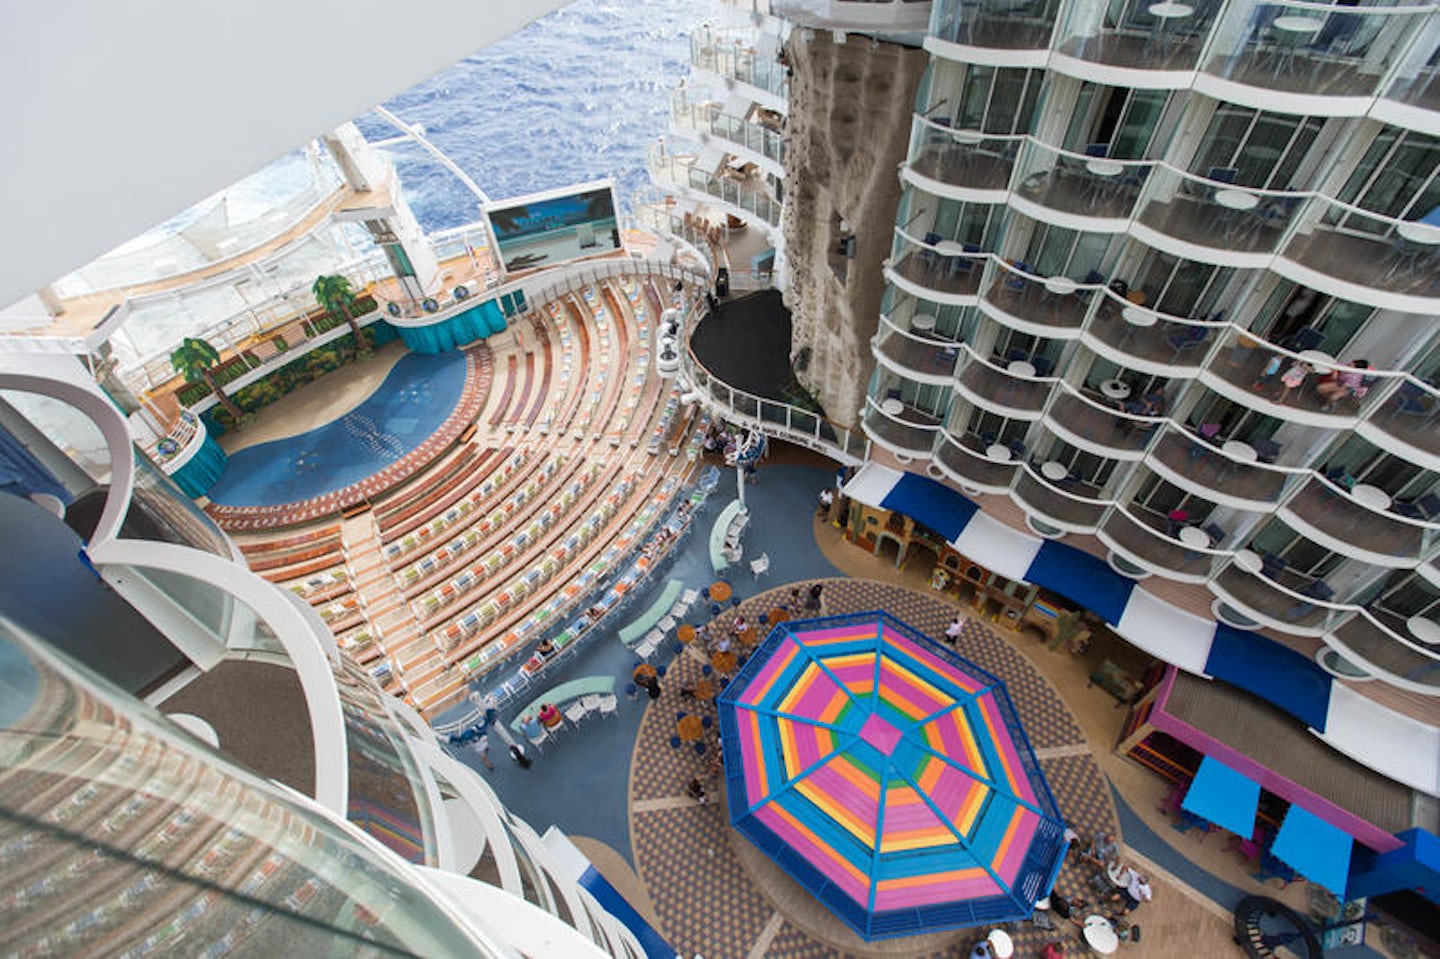 cruise critic reviews allure of the seas